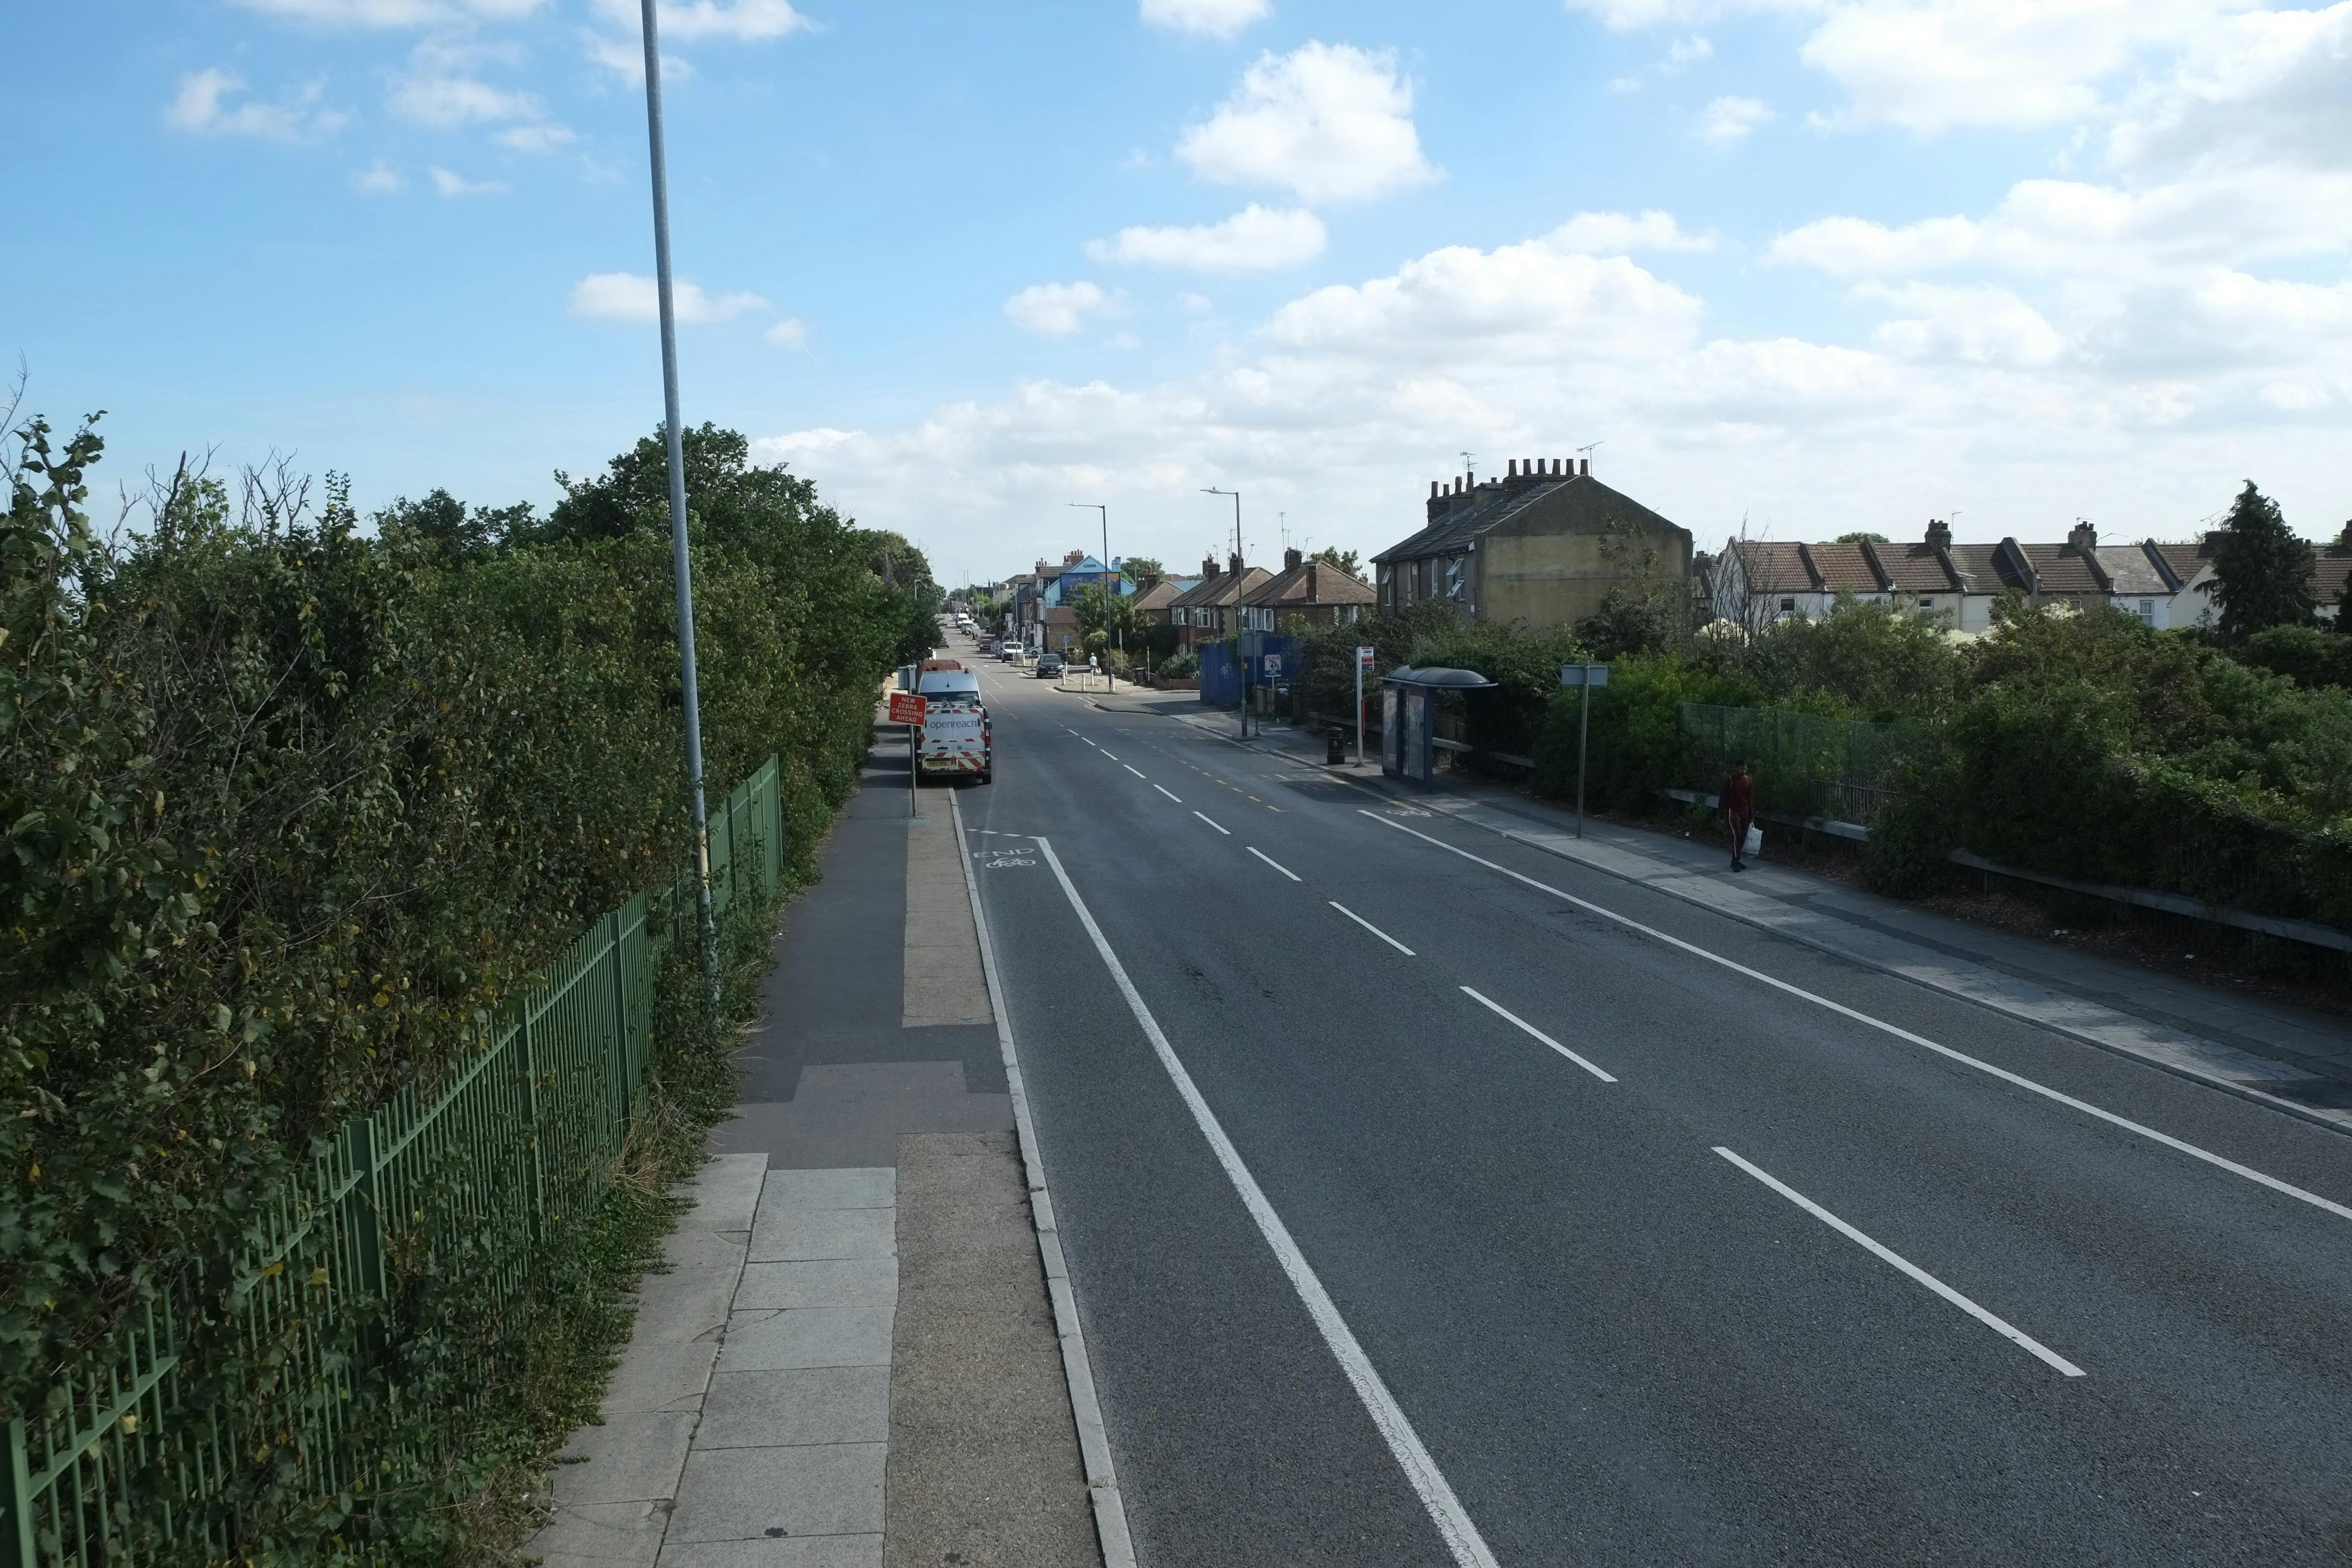 Current layout of the B2175 London Road looking east towards Rural Vale junction